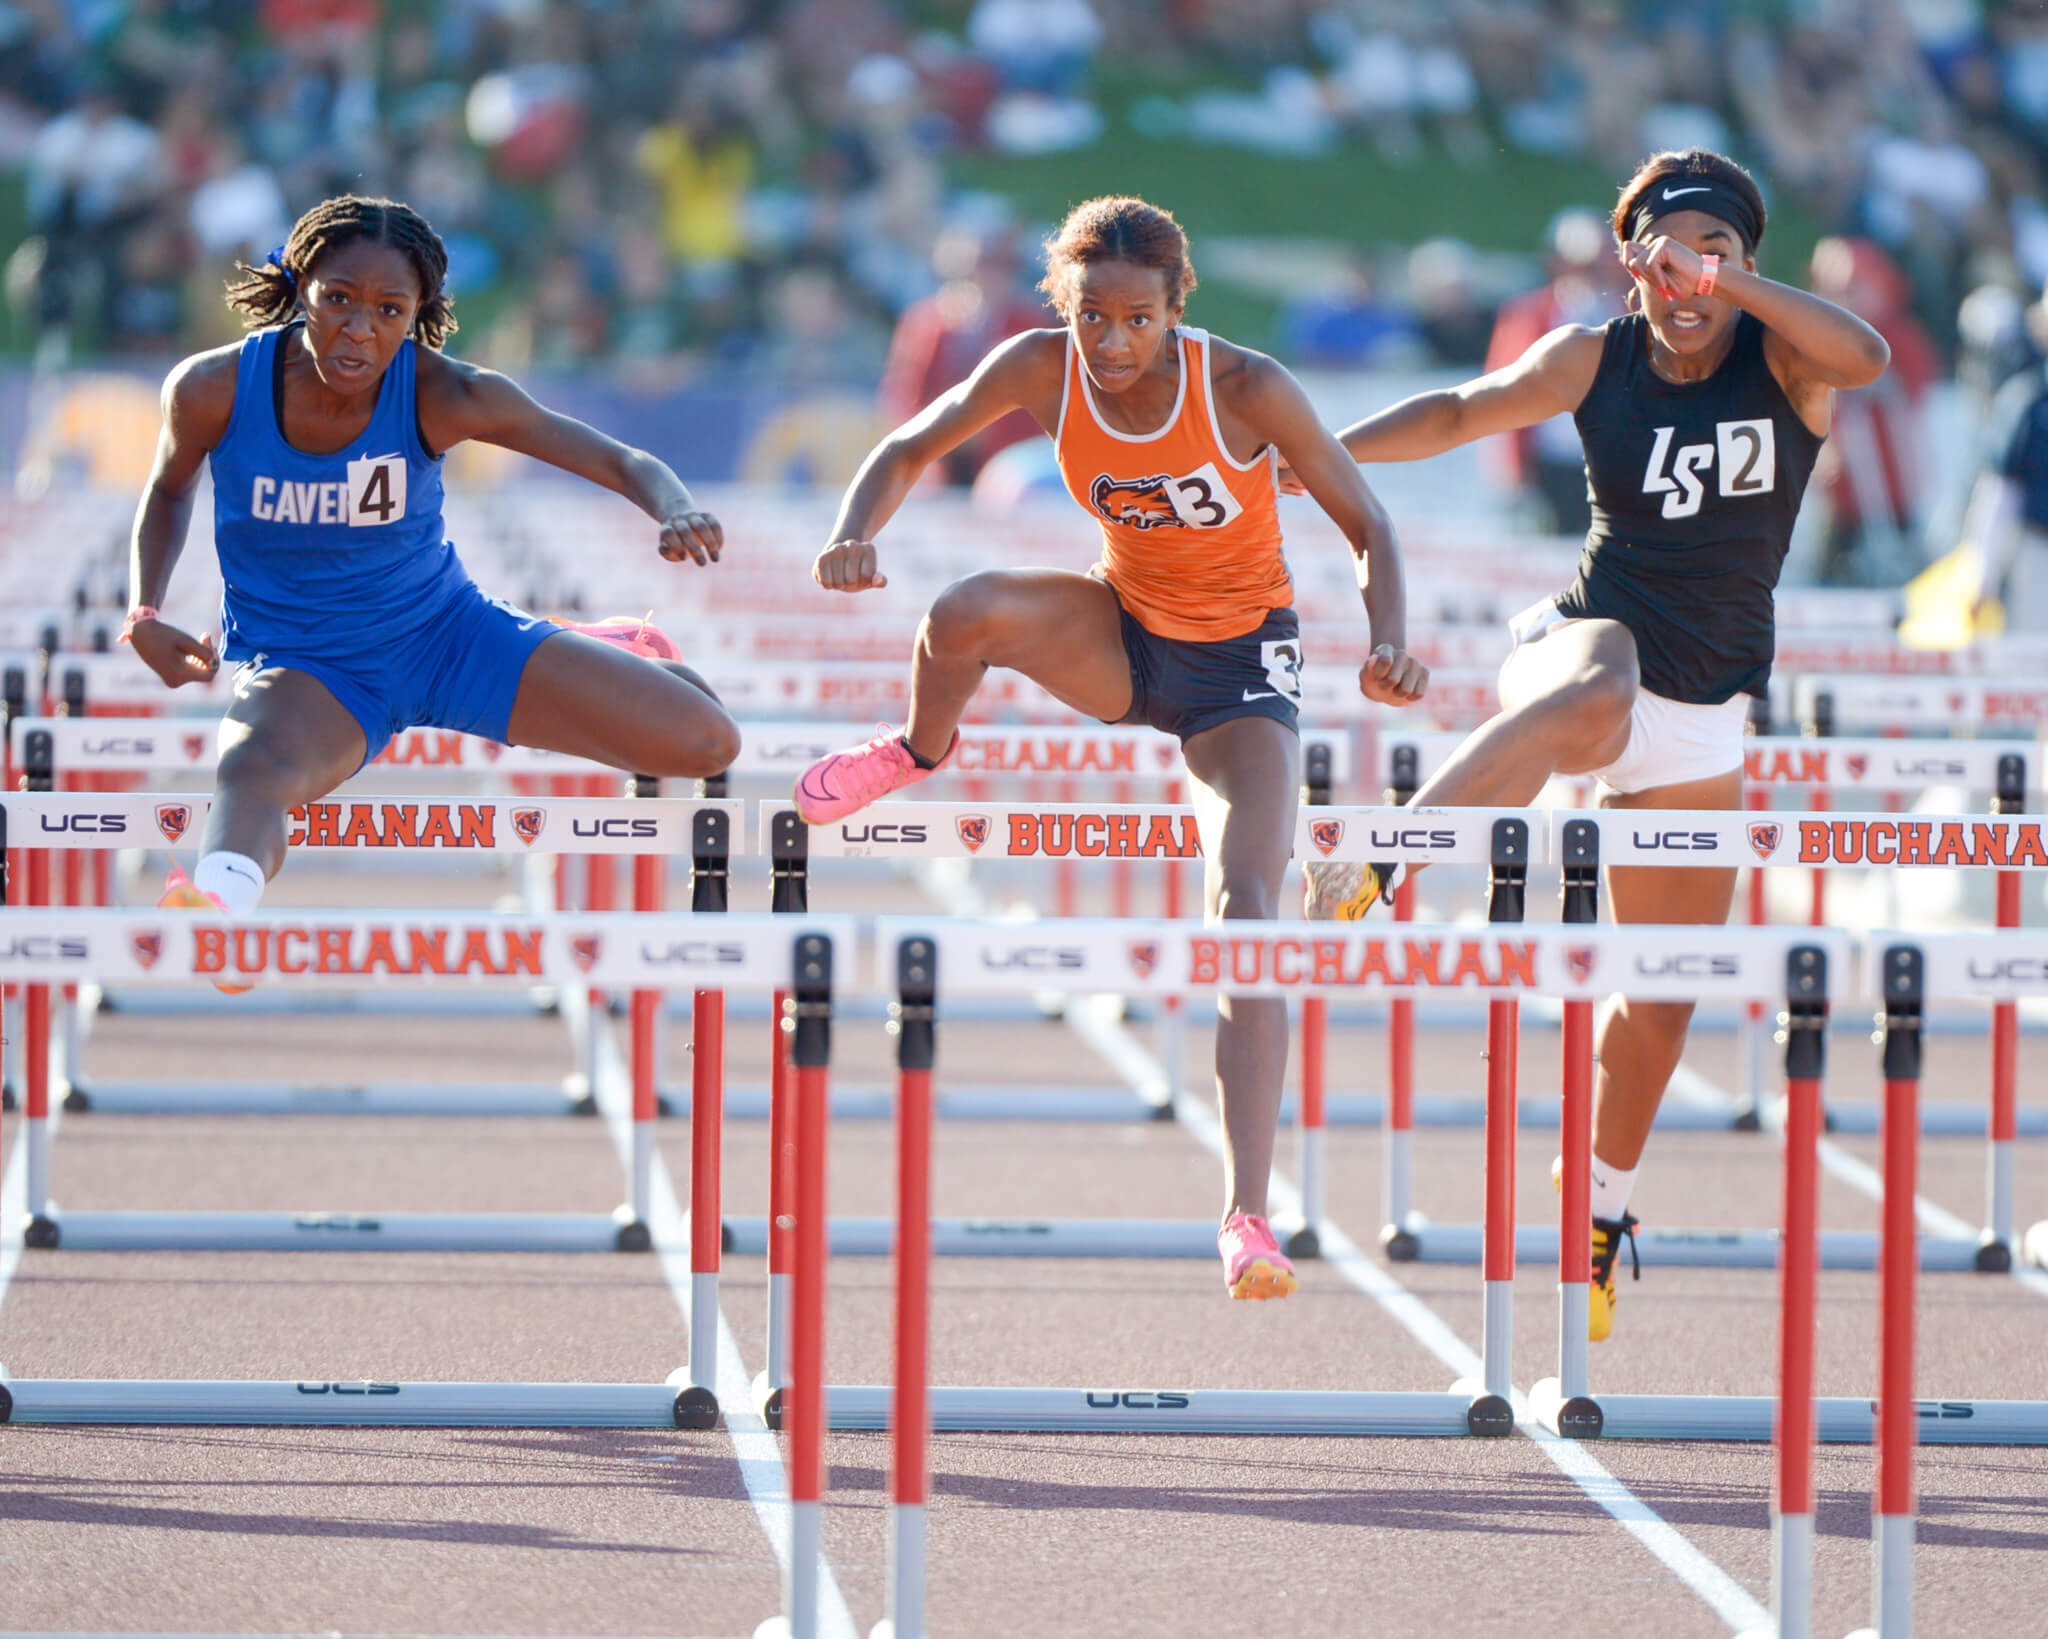 Kailah McKenzie, of Perris' Orange Vista High, wearing No. 3, runs to third place in the 100-meter hurdle finals at the CIF State track and field finals at Buchanan High in Clovis Saturday. McKenzie was timed in 13.89 seconds. Kori Fields, of St. Mary's, won in 13.79. Giselle Kirchner, of Rocklin, was second in 13.85. She also took fifth in the long jump and eighth in the high jump. Photo by Jerry Soifer